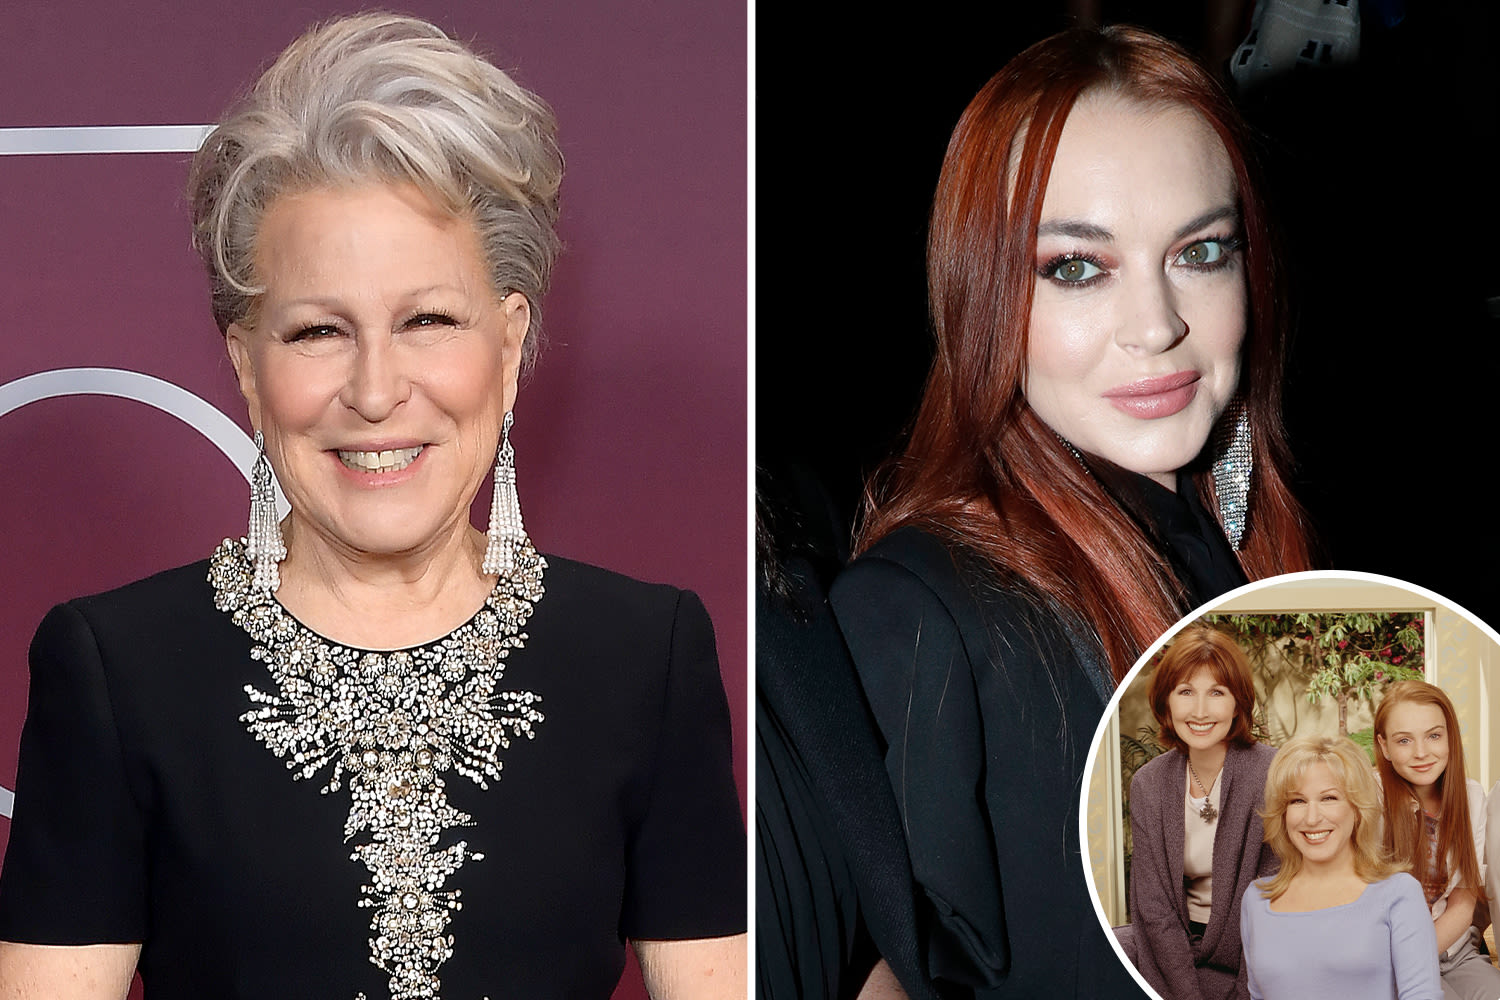 Bette Midler admits she 'would have sued' 14-year-old Lindsay Lohan